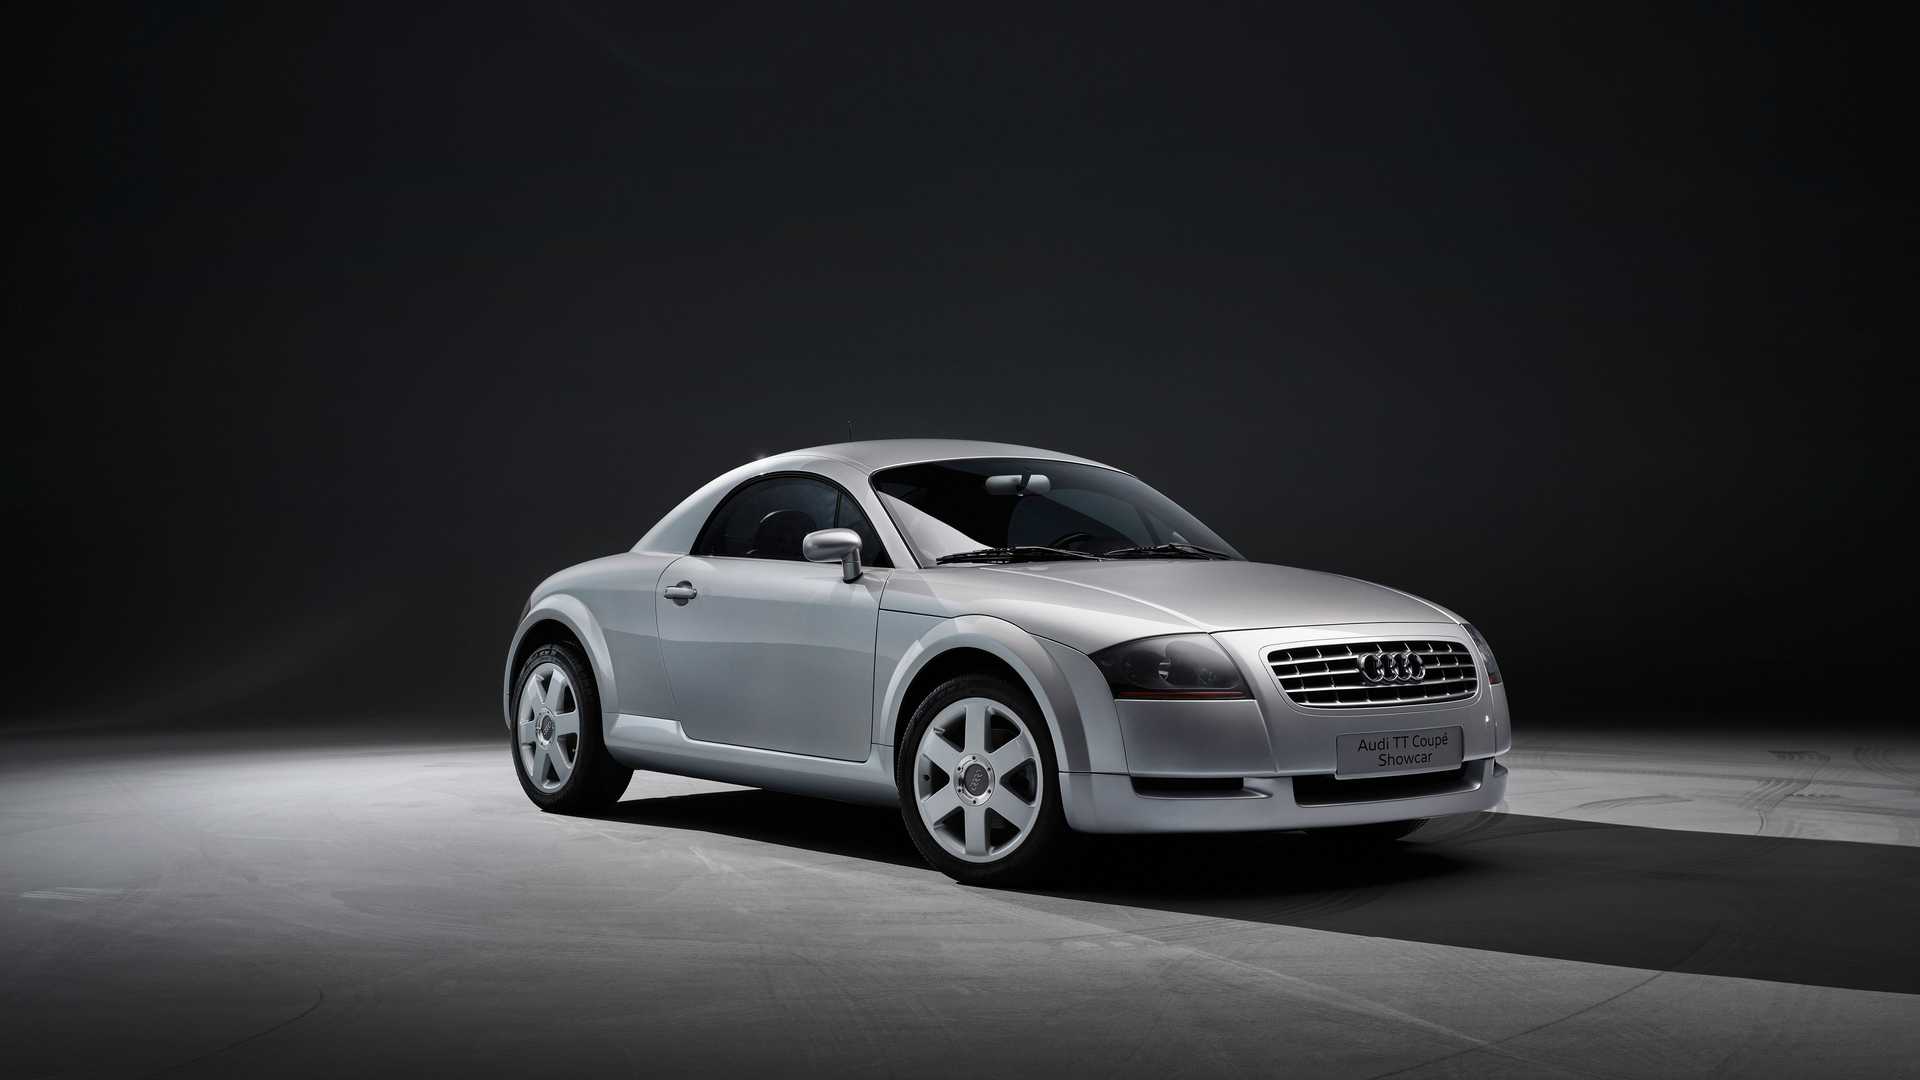 Audi TT RS Iconic Edition Cuarto frontal